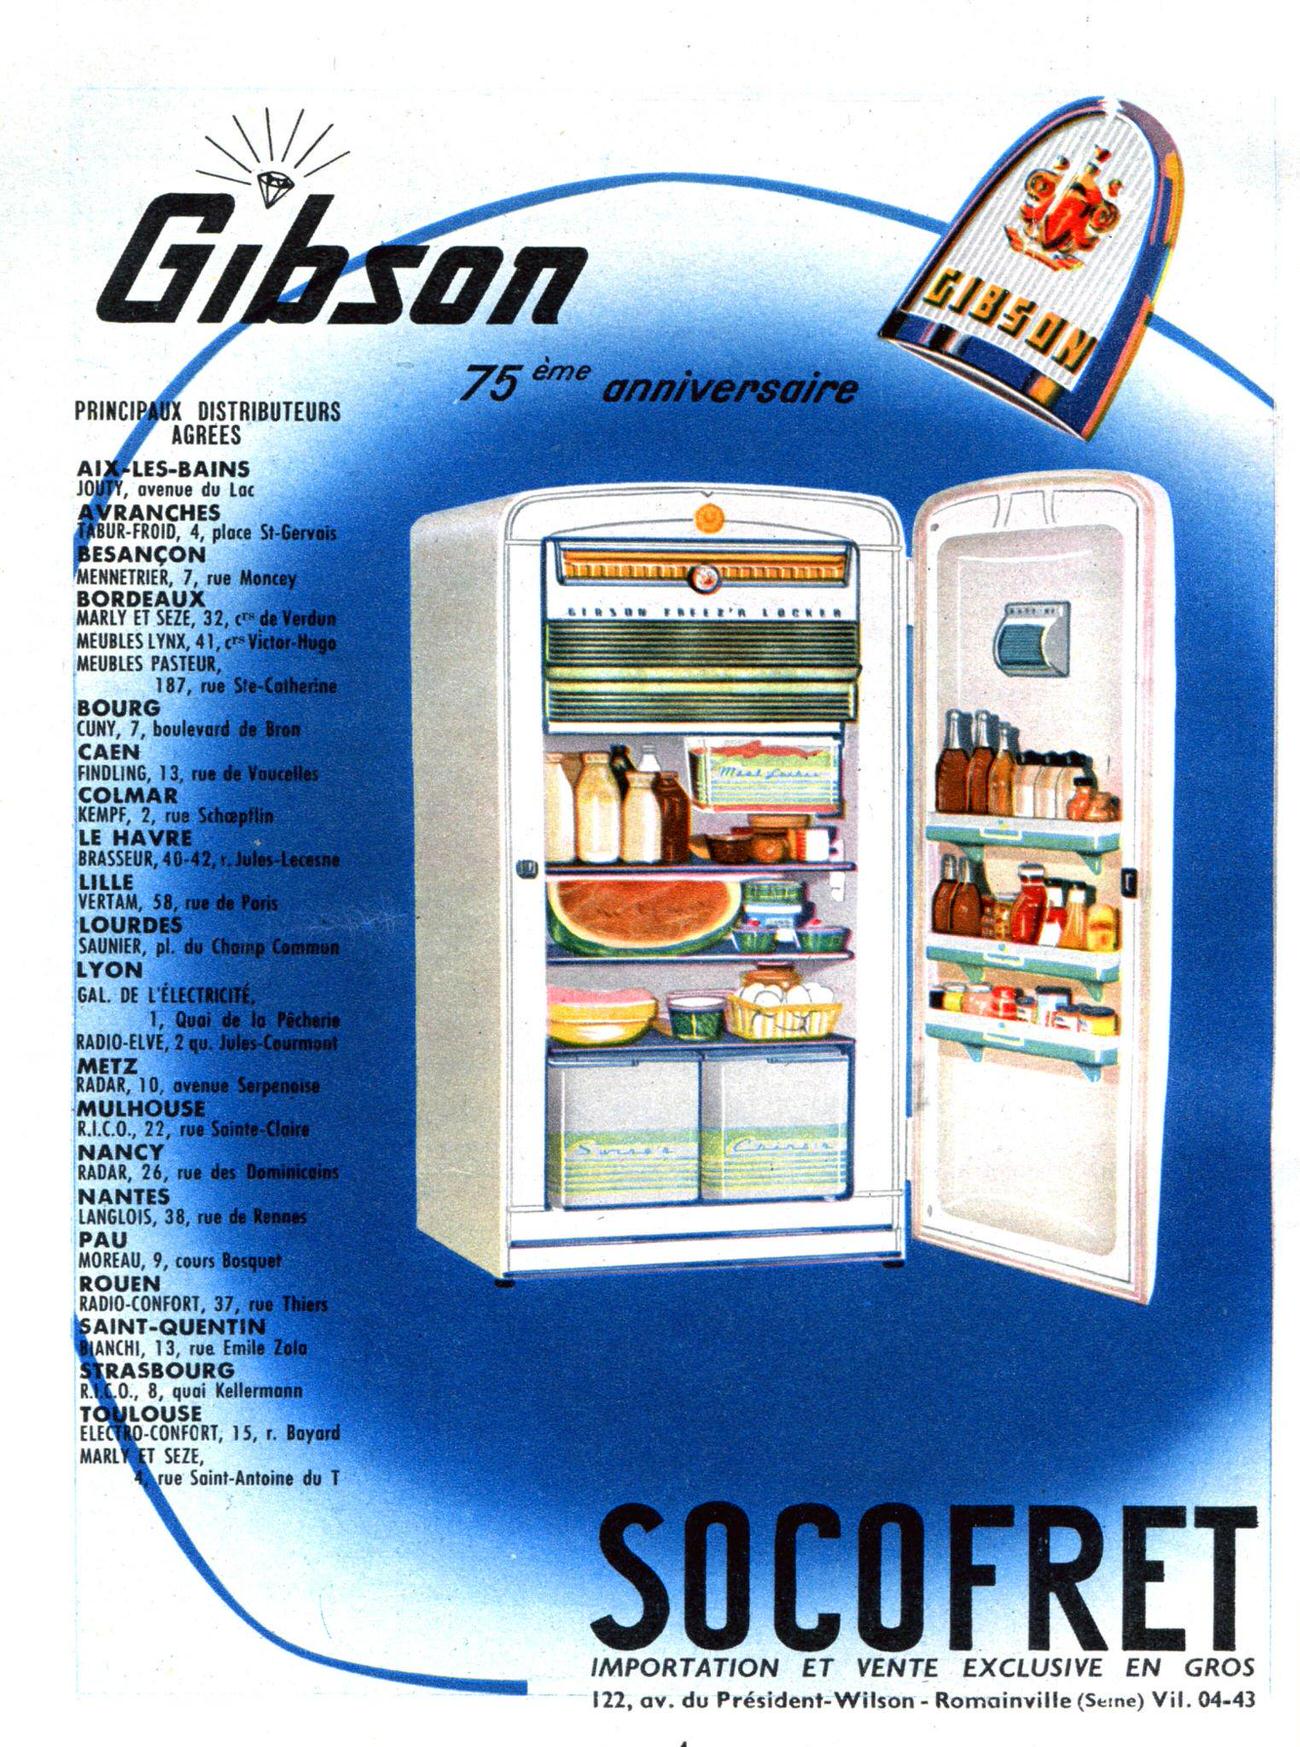 Gibson refrigerator ad, March 1952.